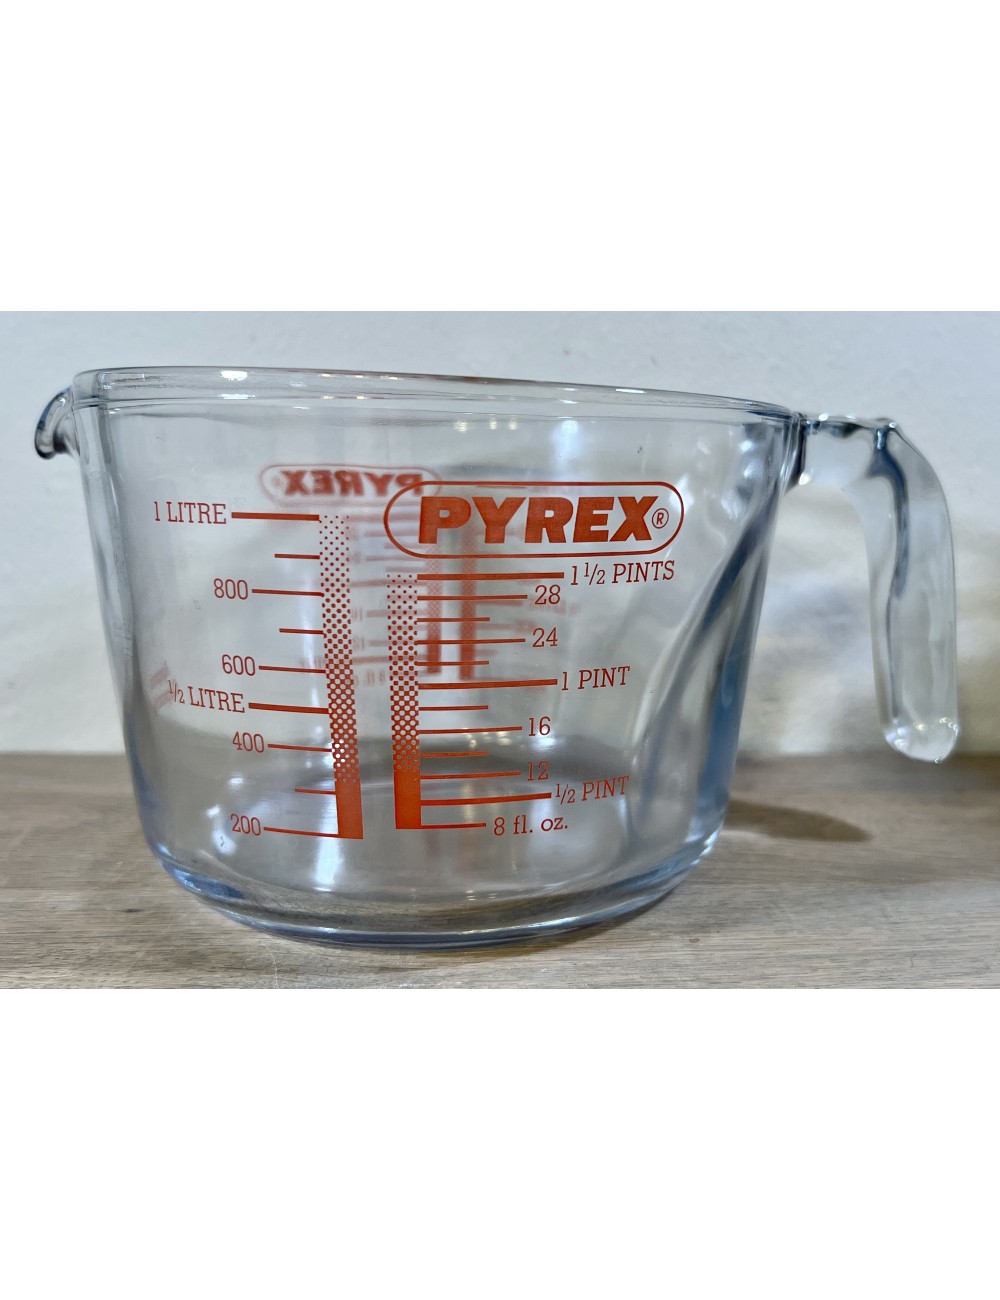 https://www.ramblingrose.nl/14514-large_default/measuring-cup-pyrex-thick-glass-model-with-size-markings.jpg